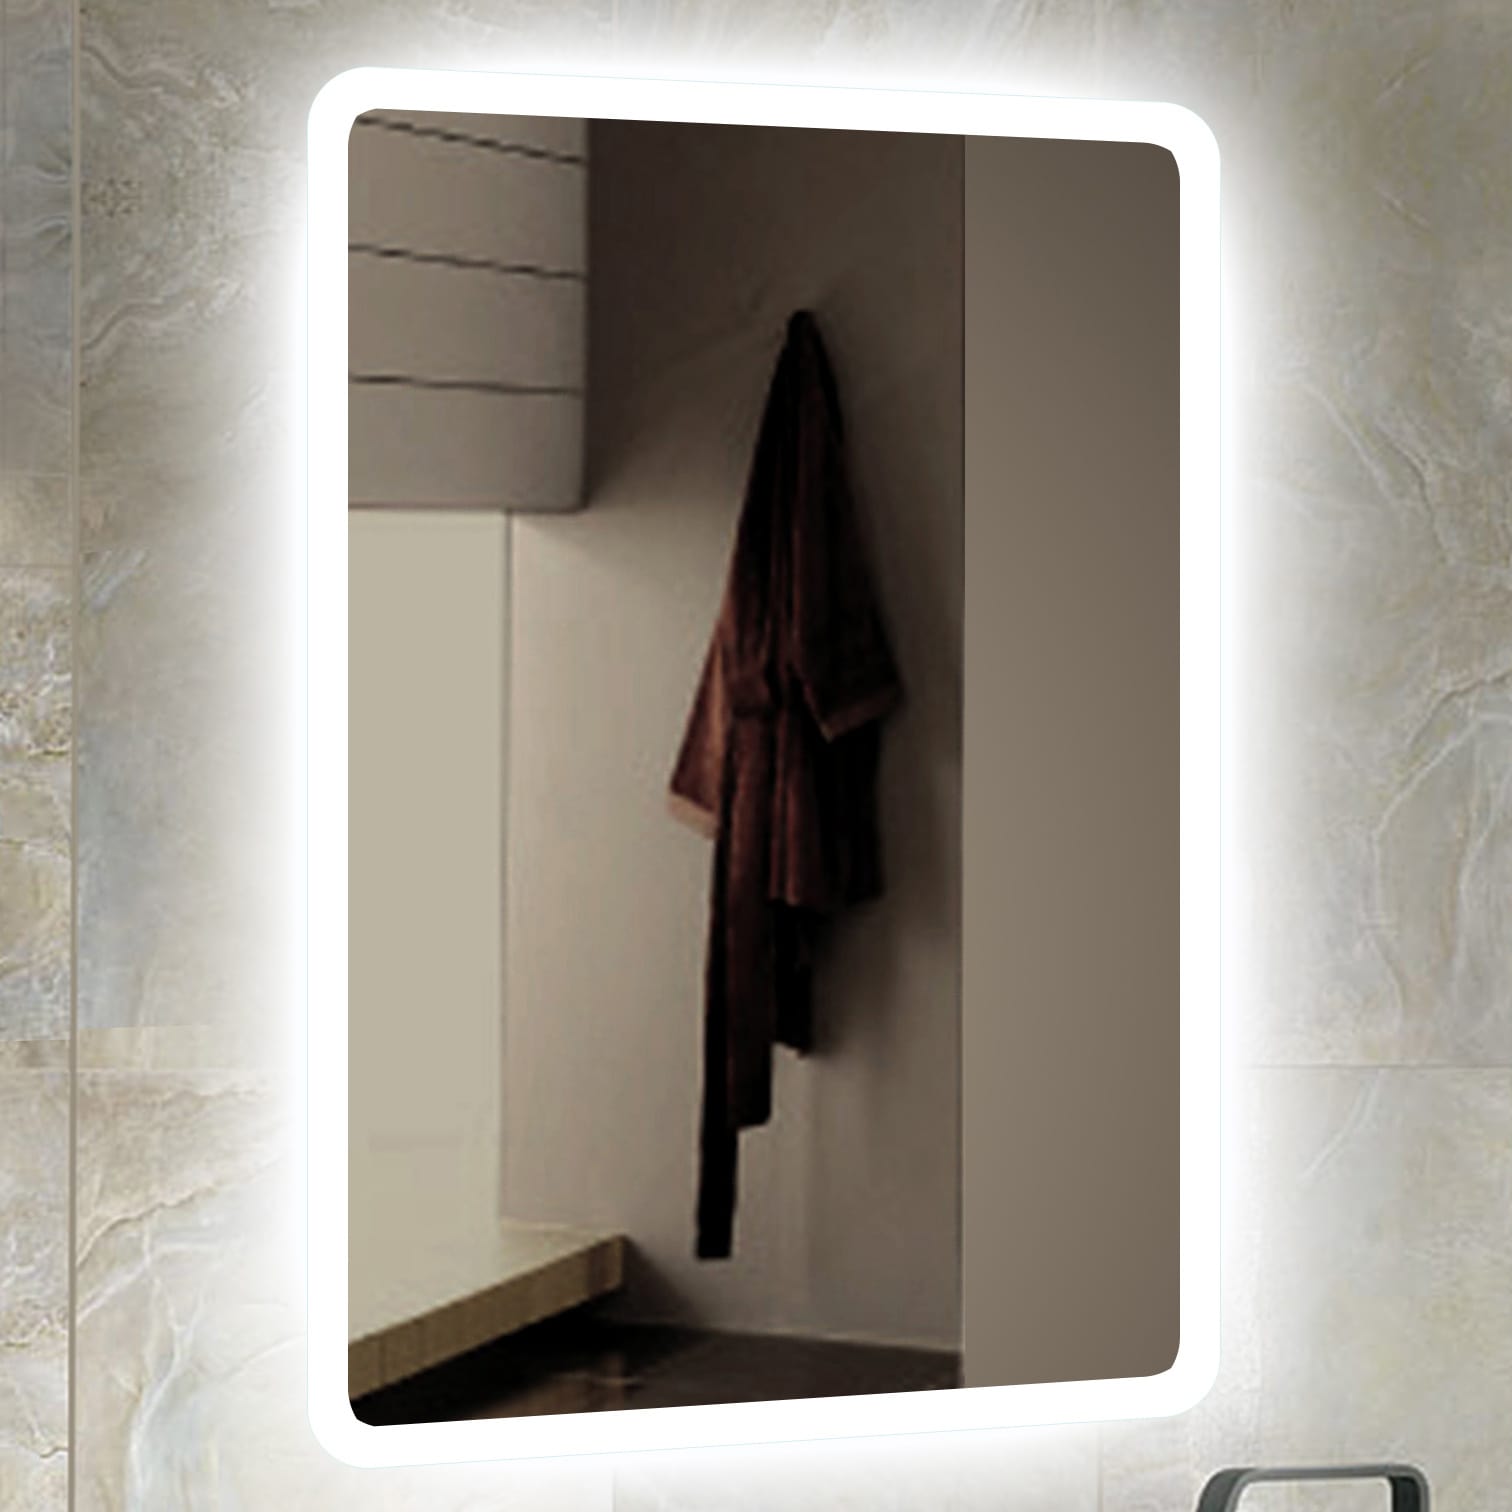 Bathroom Mirror with LED Lighting Wall Mirror to measure Heating Mat Vilno Model A02